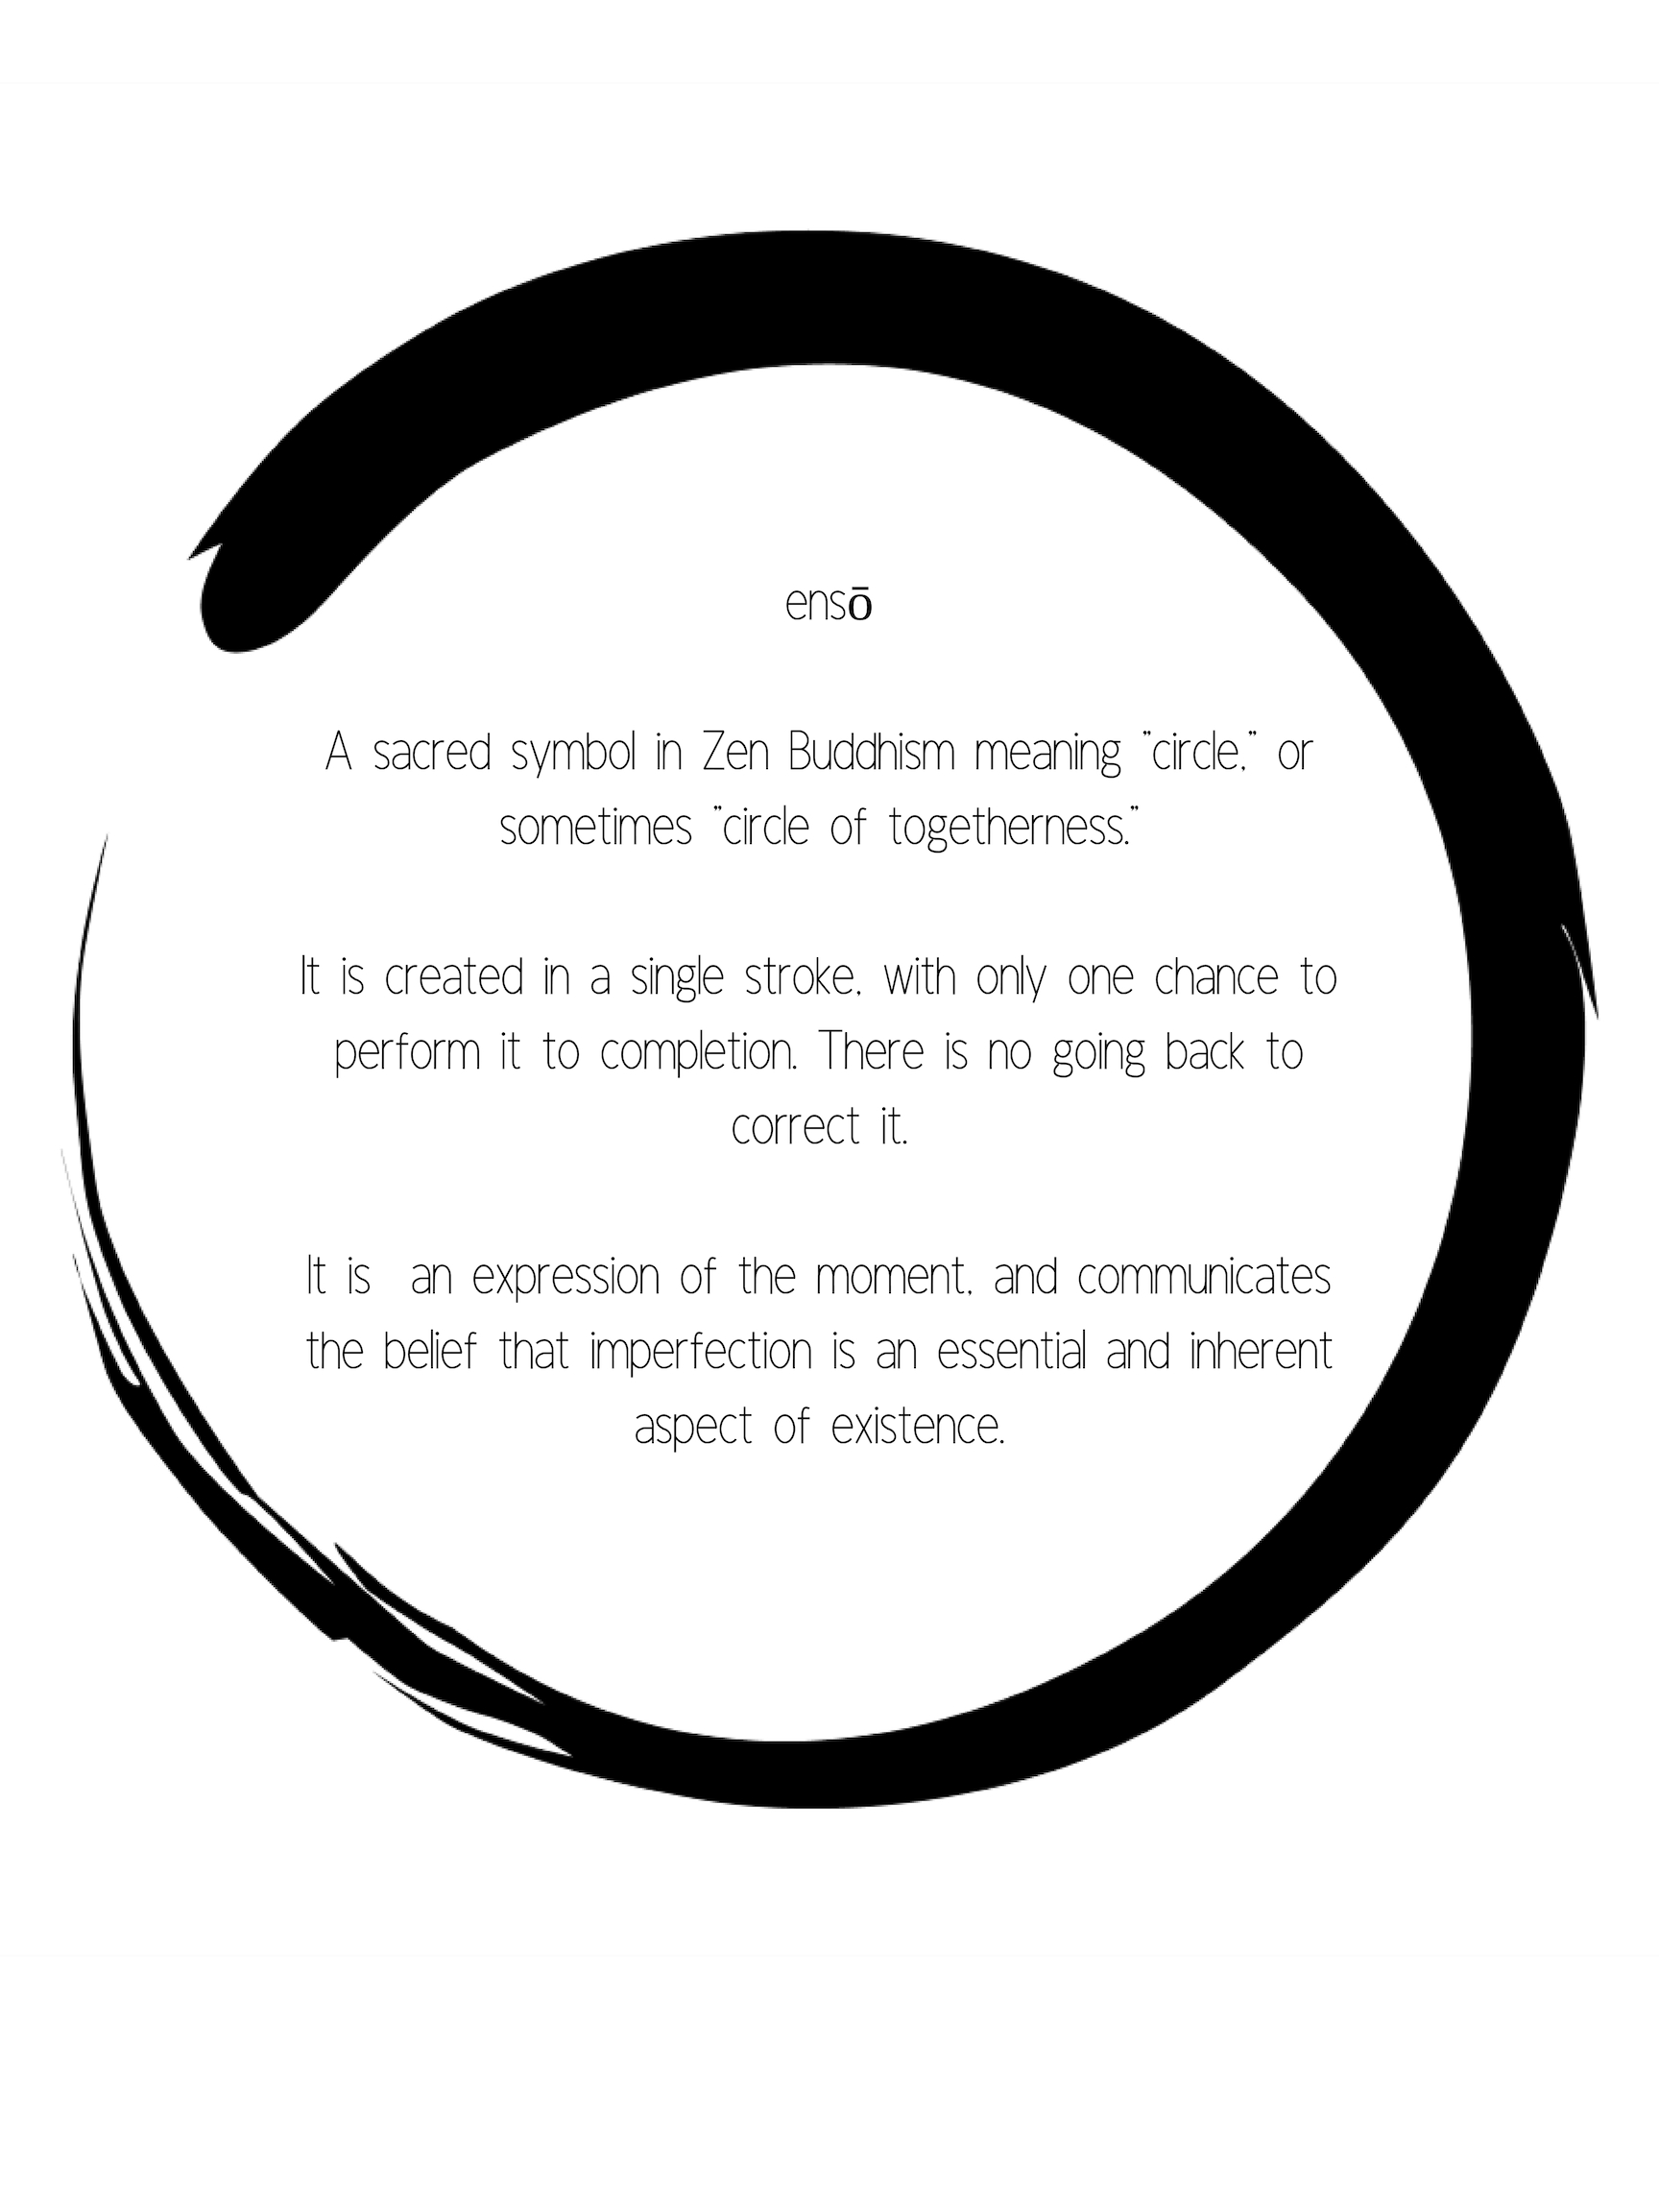 the meaning of the enso symbol tattoo